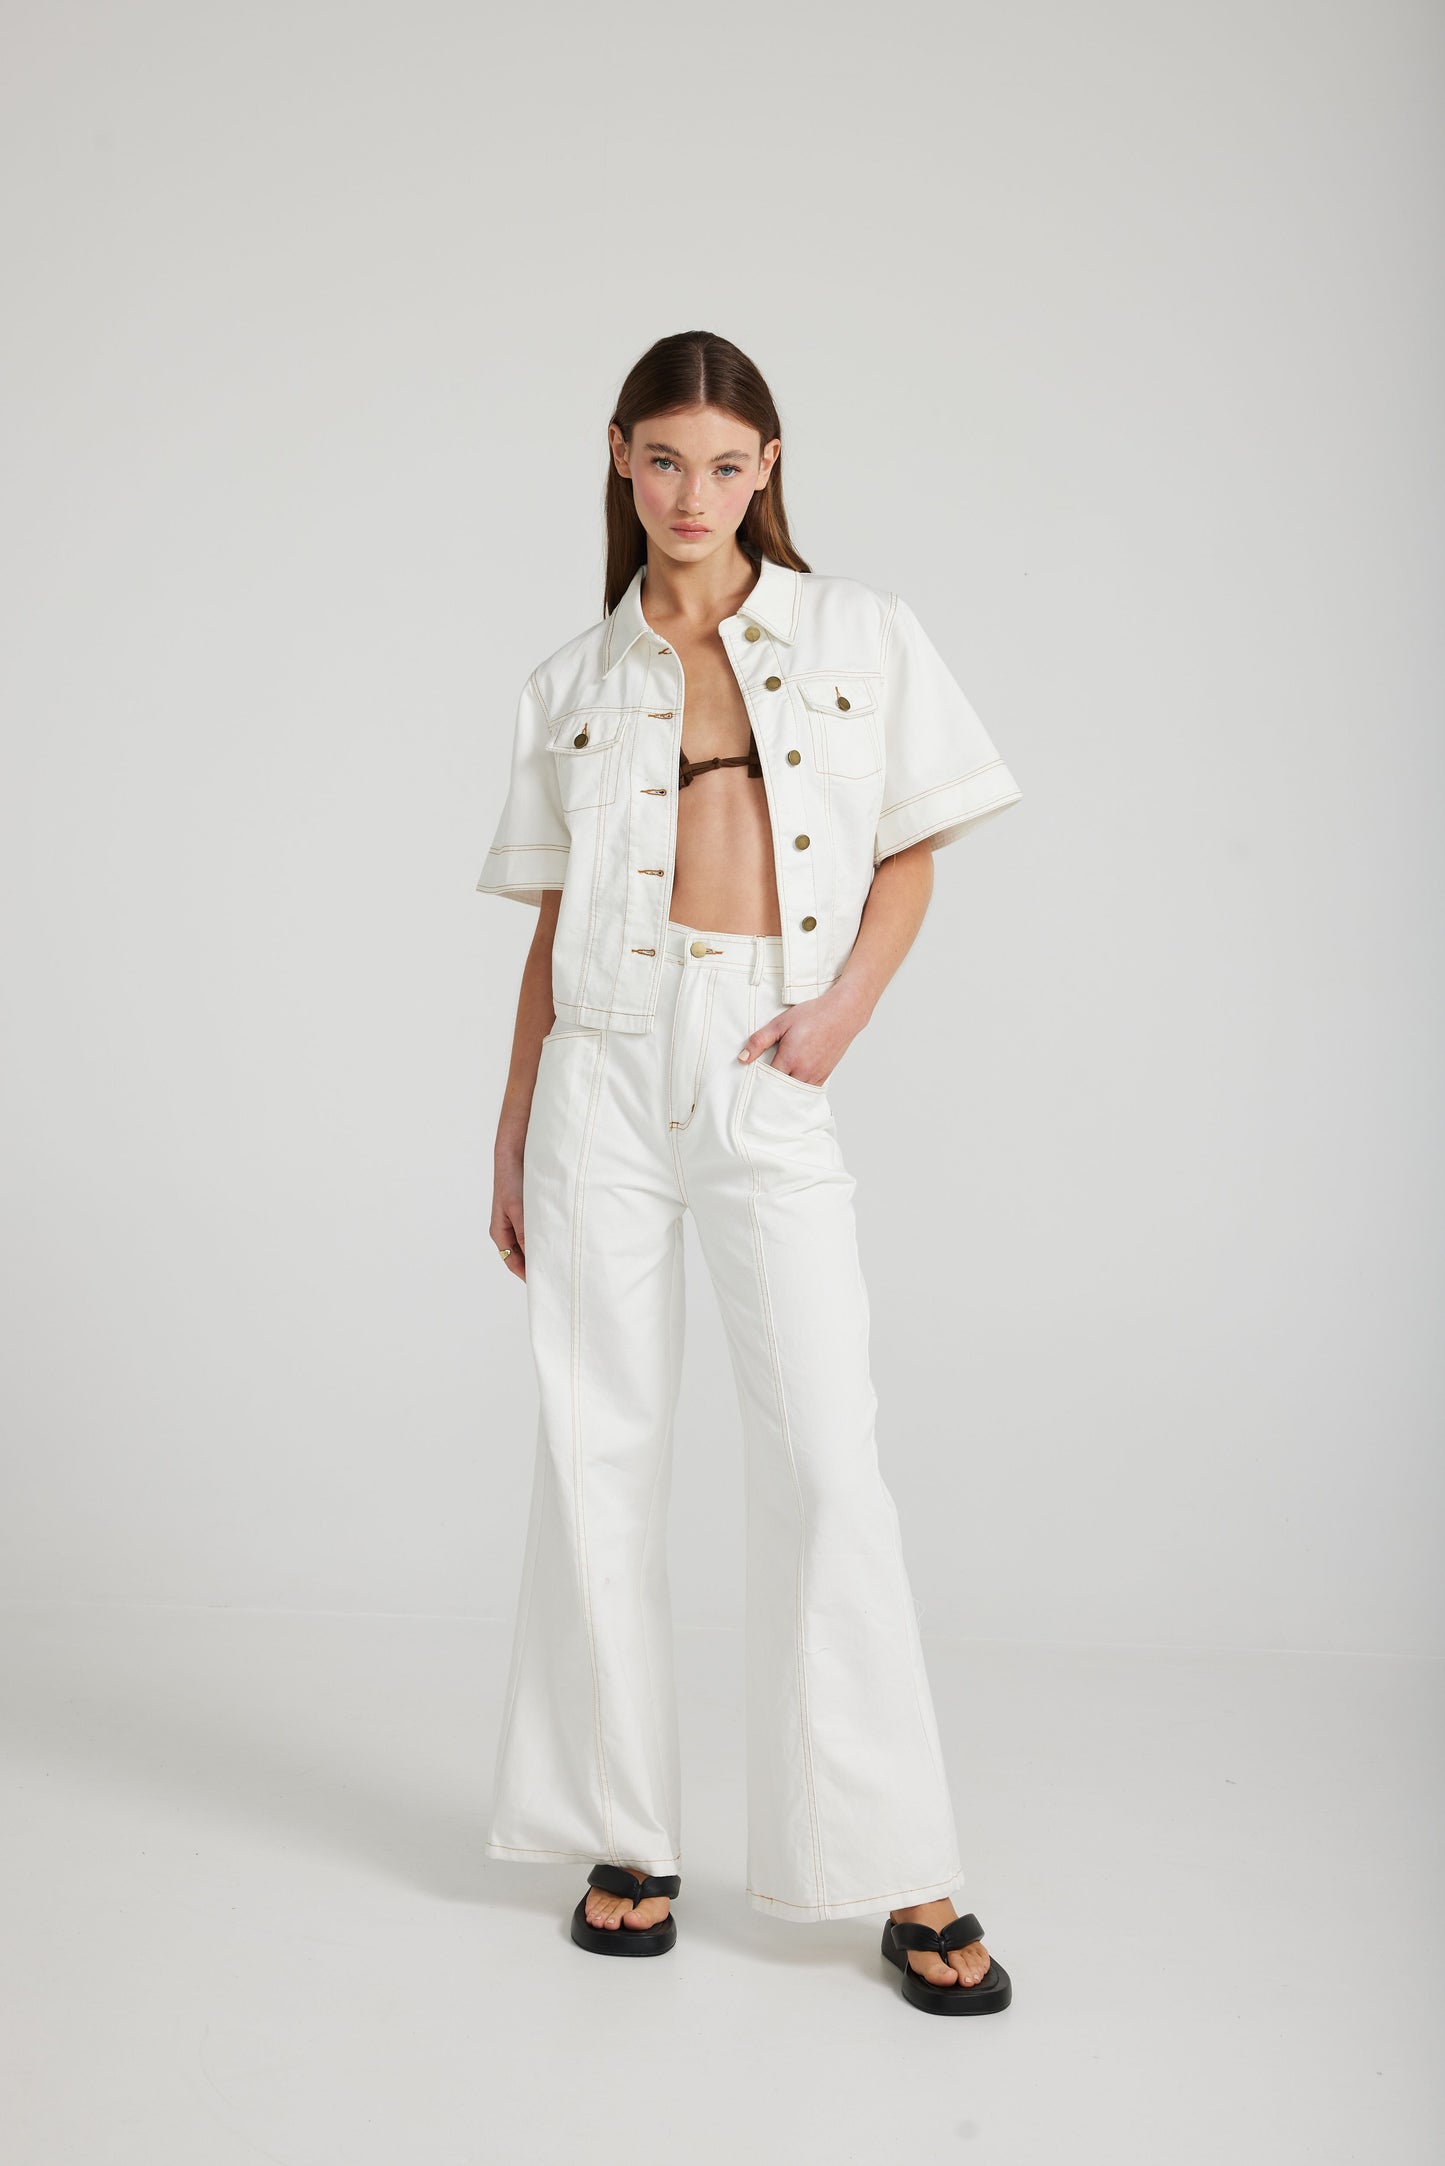 Defender Top in White Denim by Daisy Says